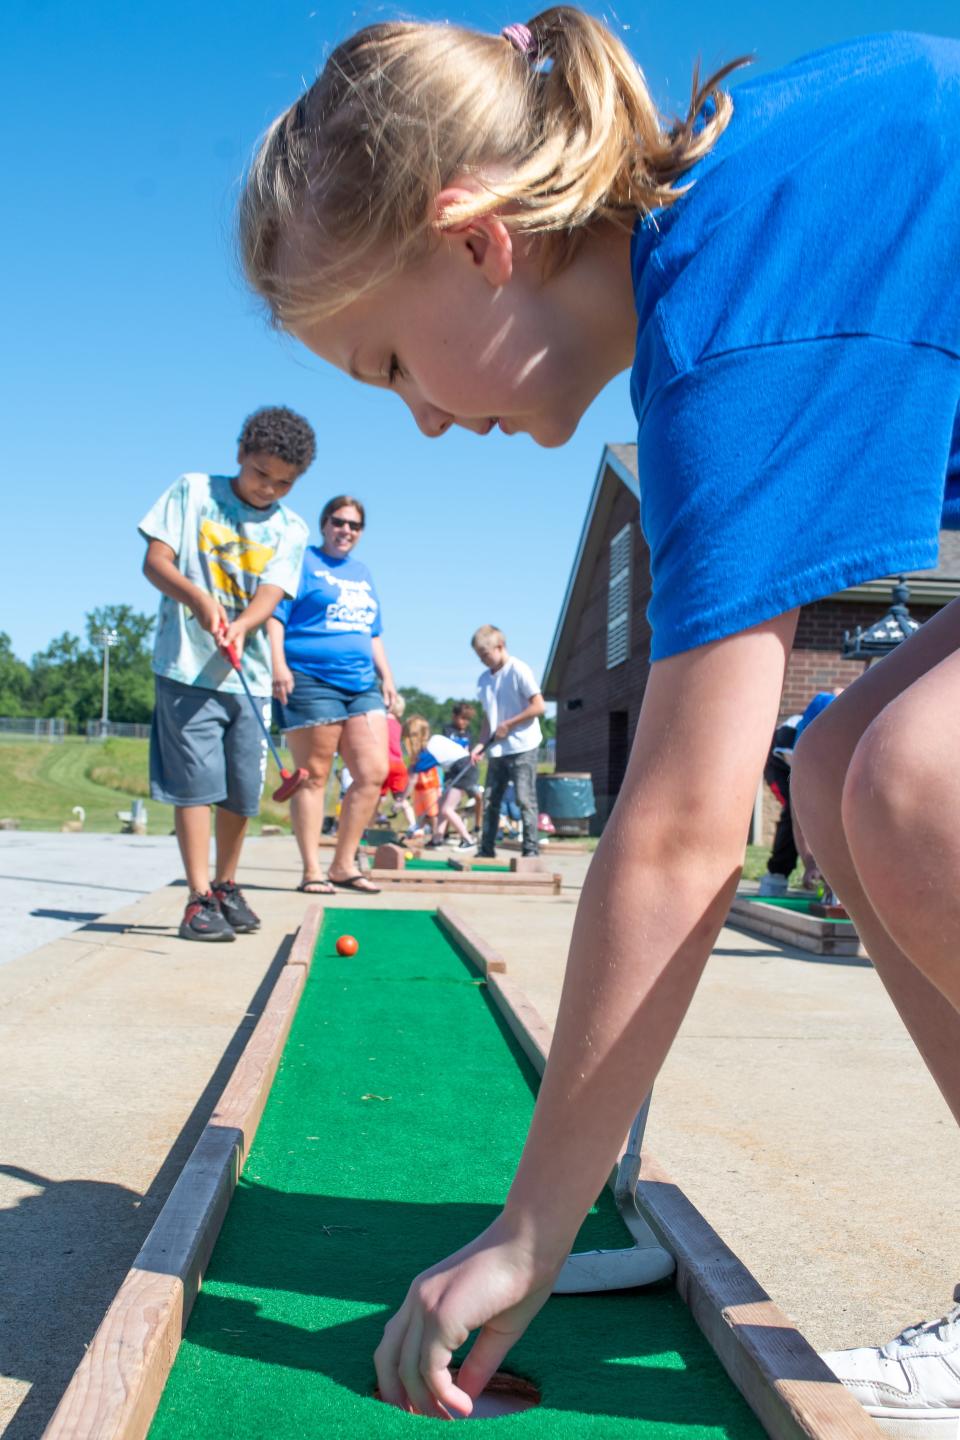 Students line up, trying to get a hole-in-one at the mini golf course set up at the intermediate school. The CATS Camp summer programming offers numerous activities, field trips, and hands-on educational opportunities.